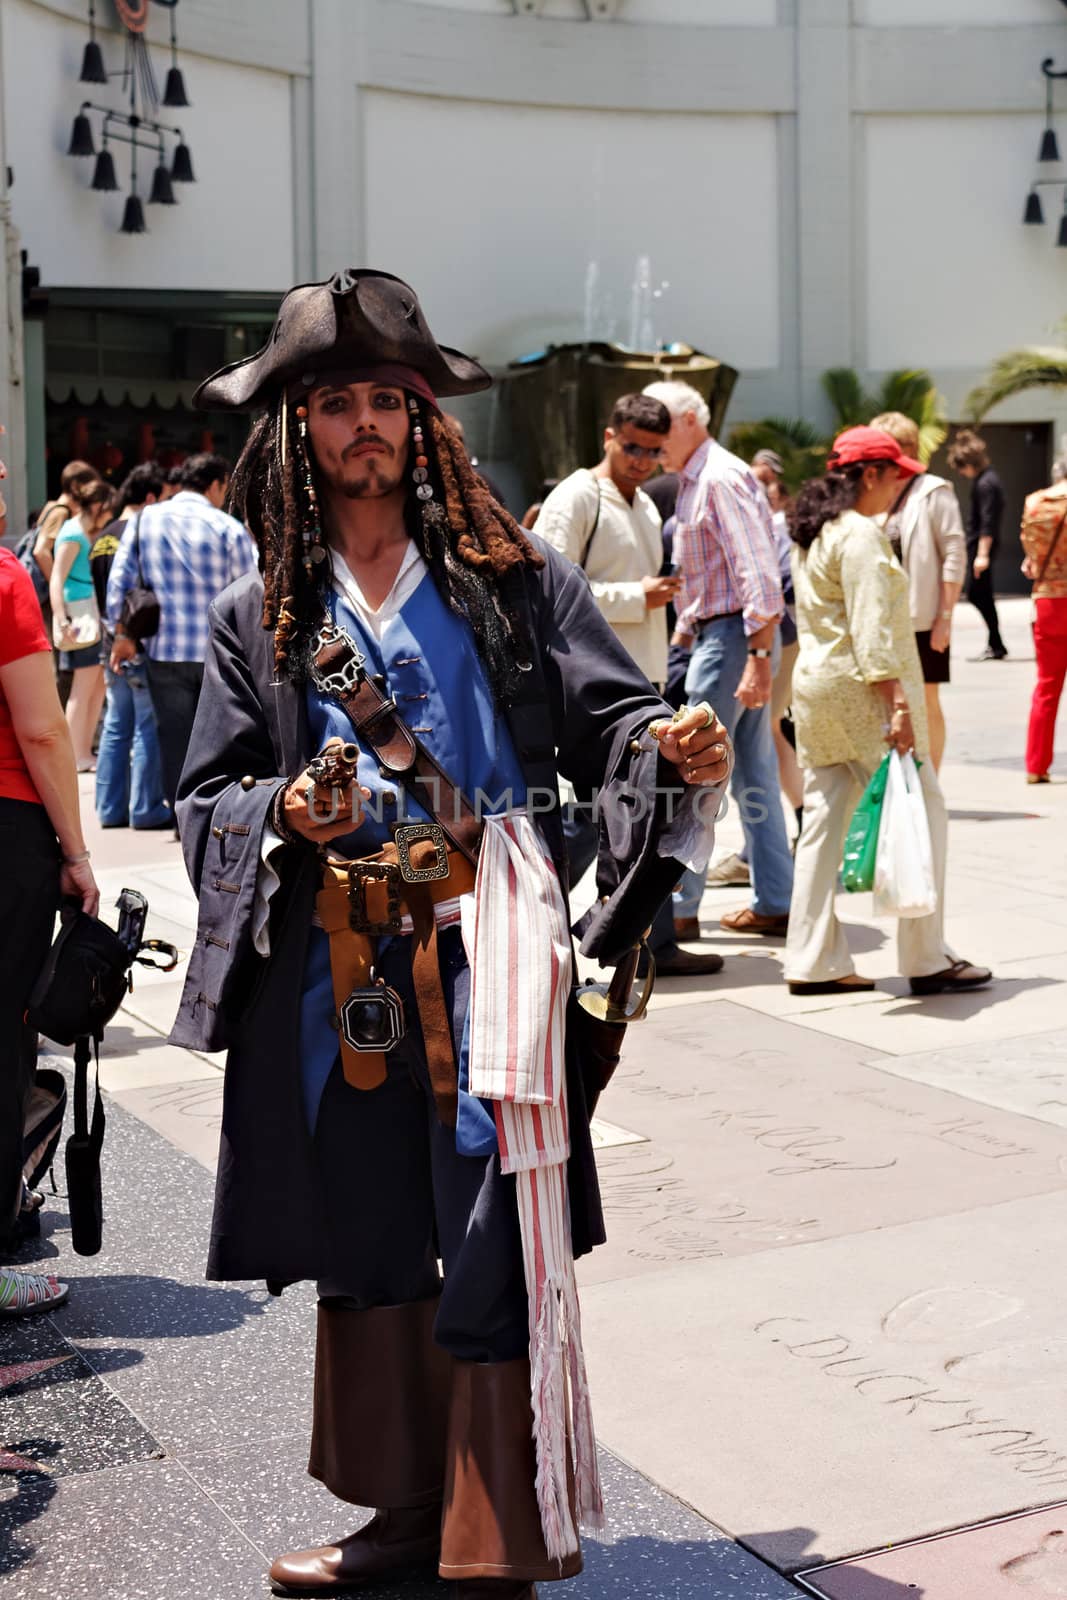 LOS ANGELES - MAY 27: Captain Jack Sparrow Impersonators on Hollywood Blvd., May 27, 2009 in Hollywood, CA